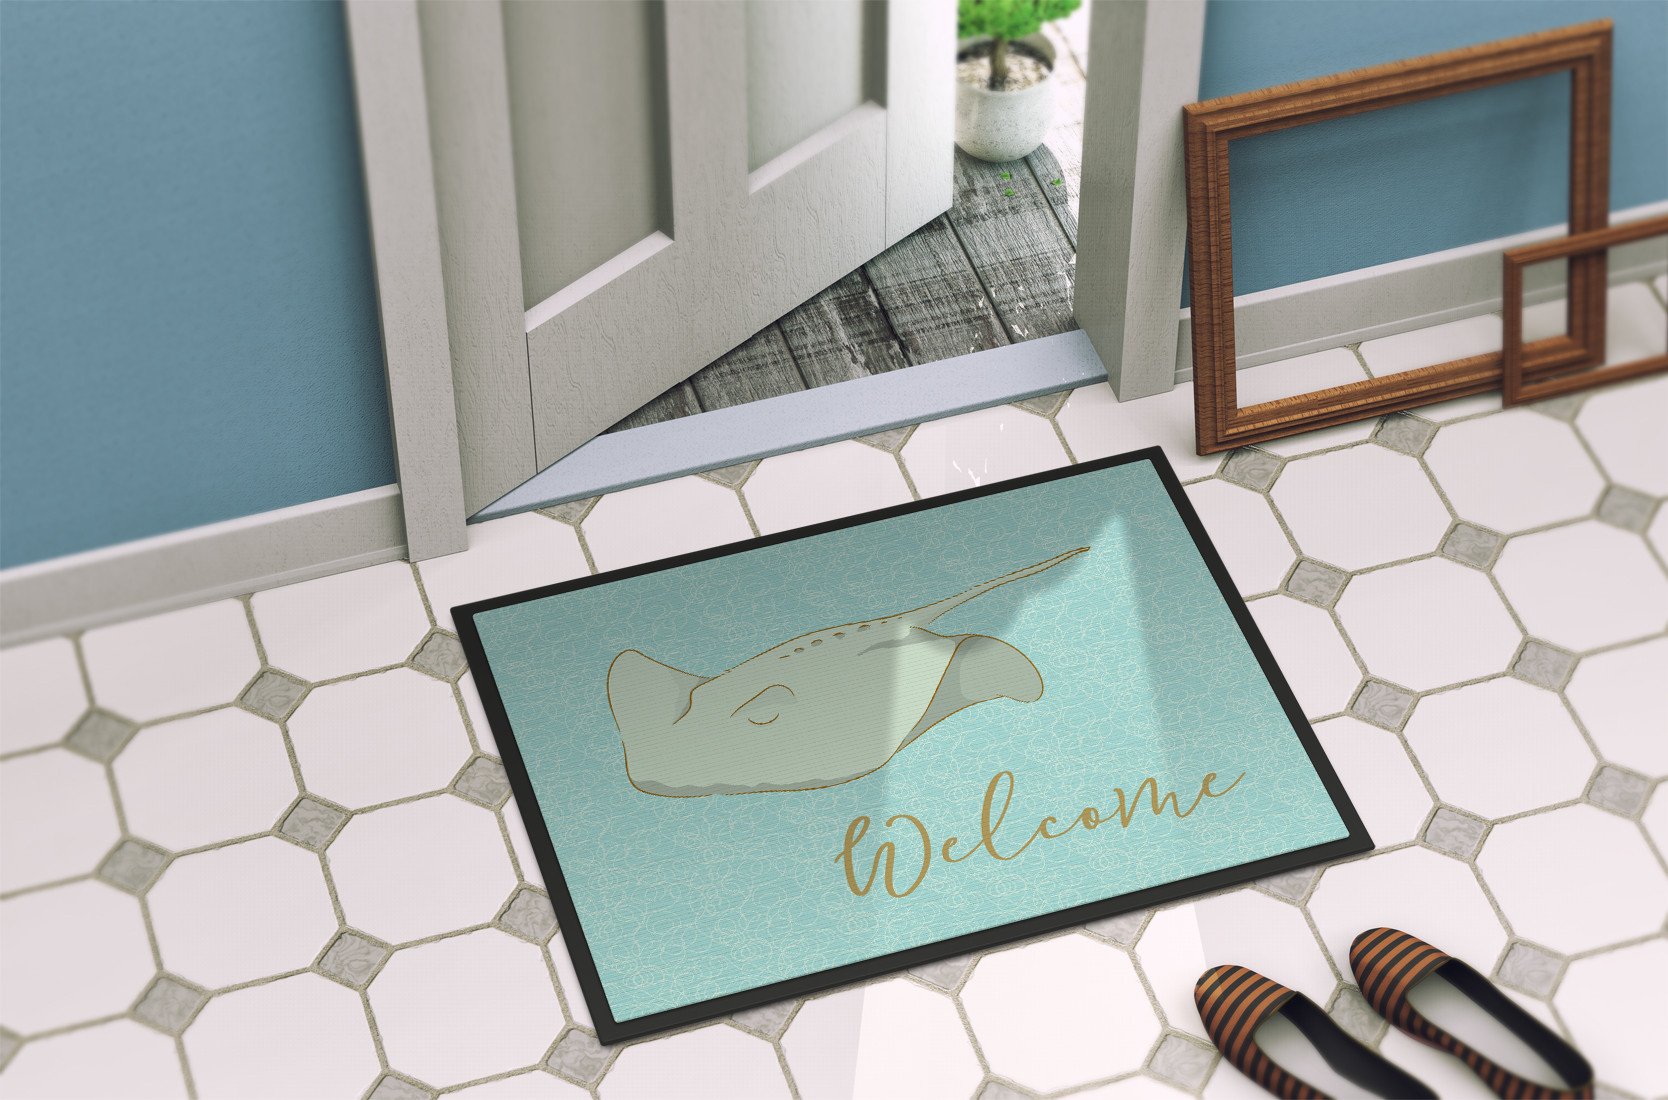 Sting Ray Welcome Indoor or Outdoor Mat 24x36 BB8561JMAT by Caroline's Treasures